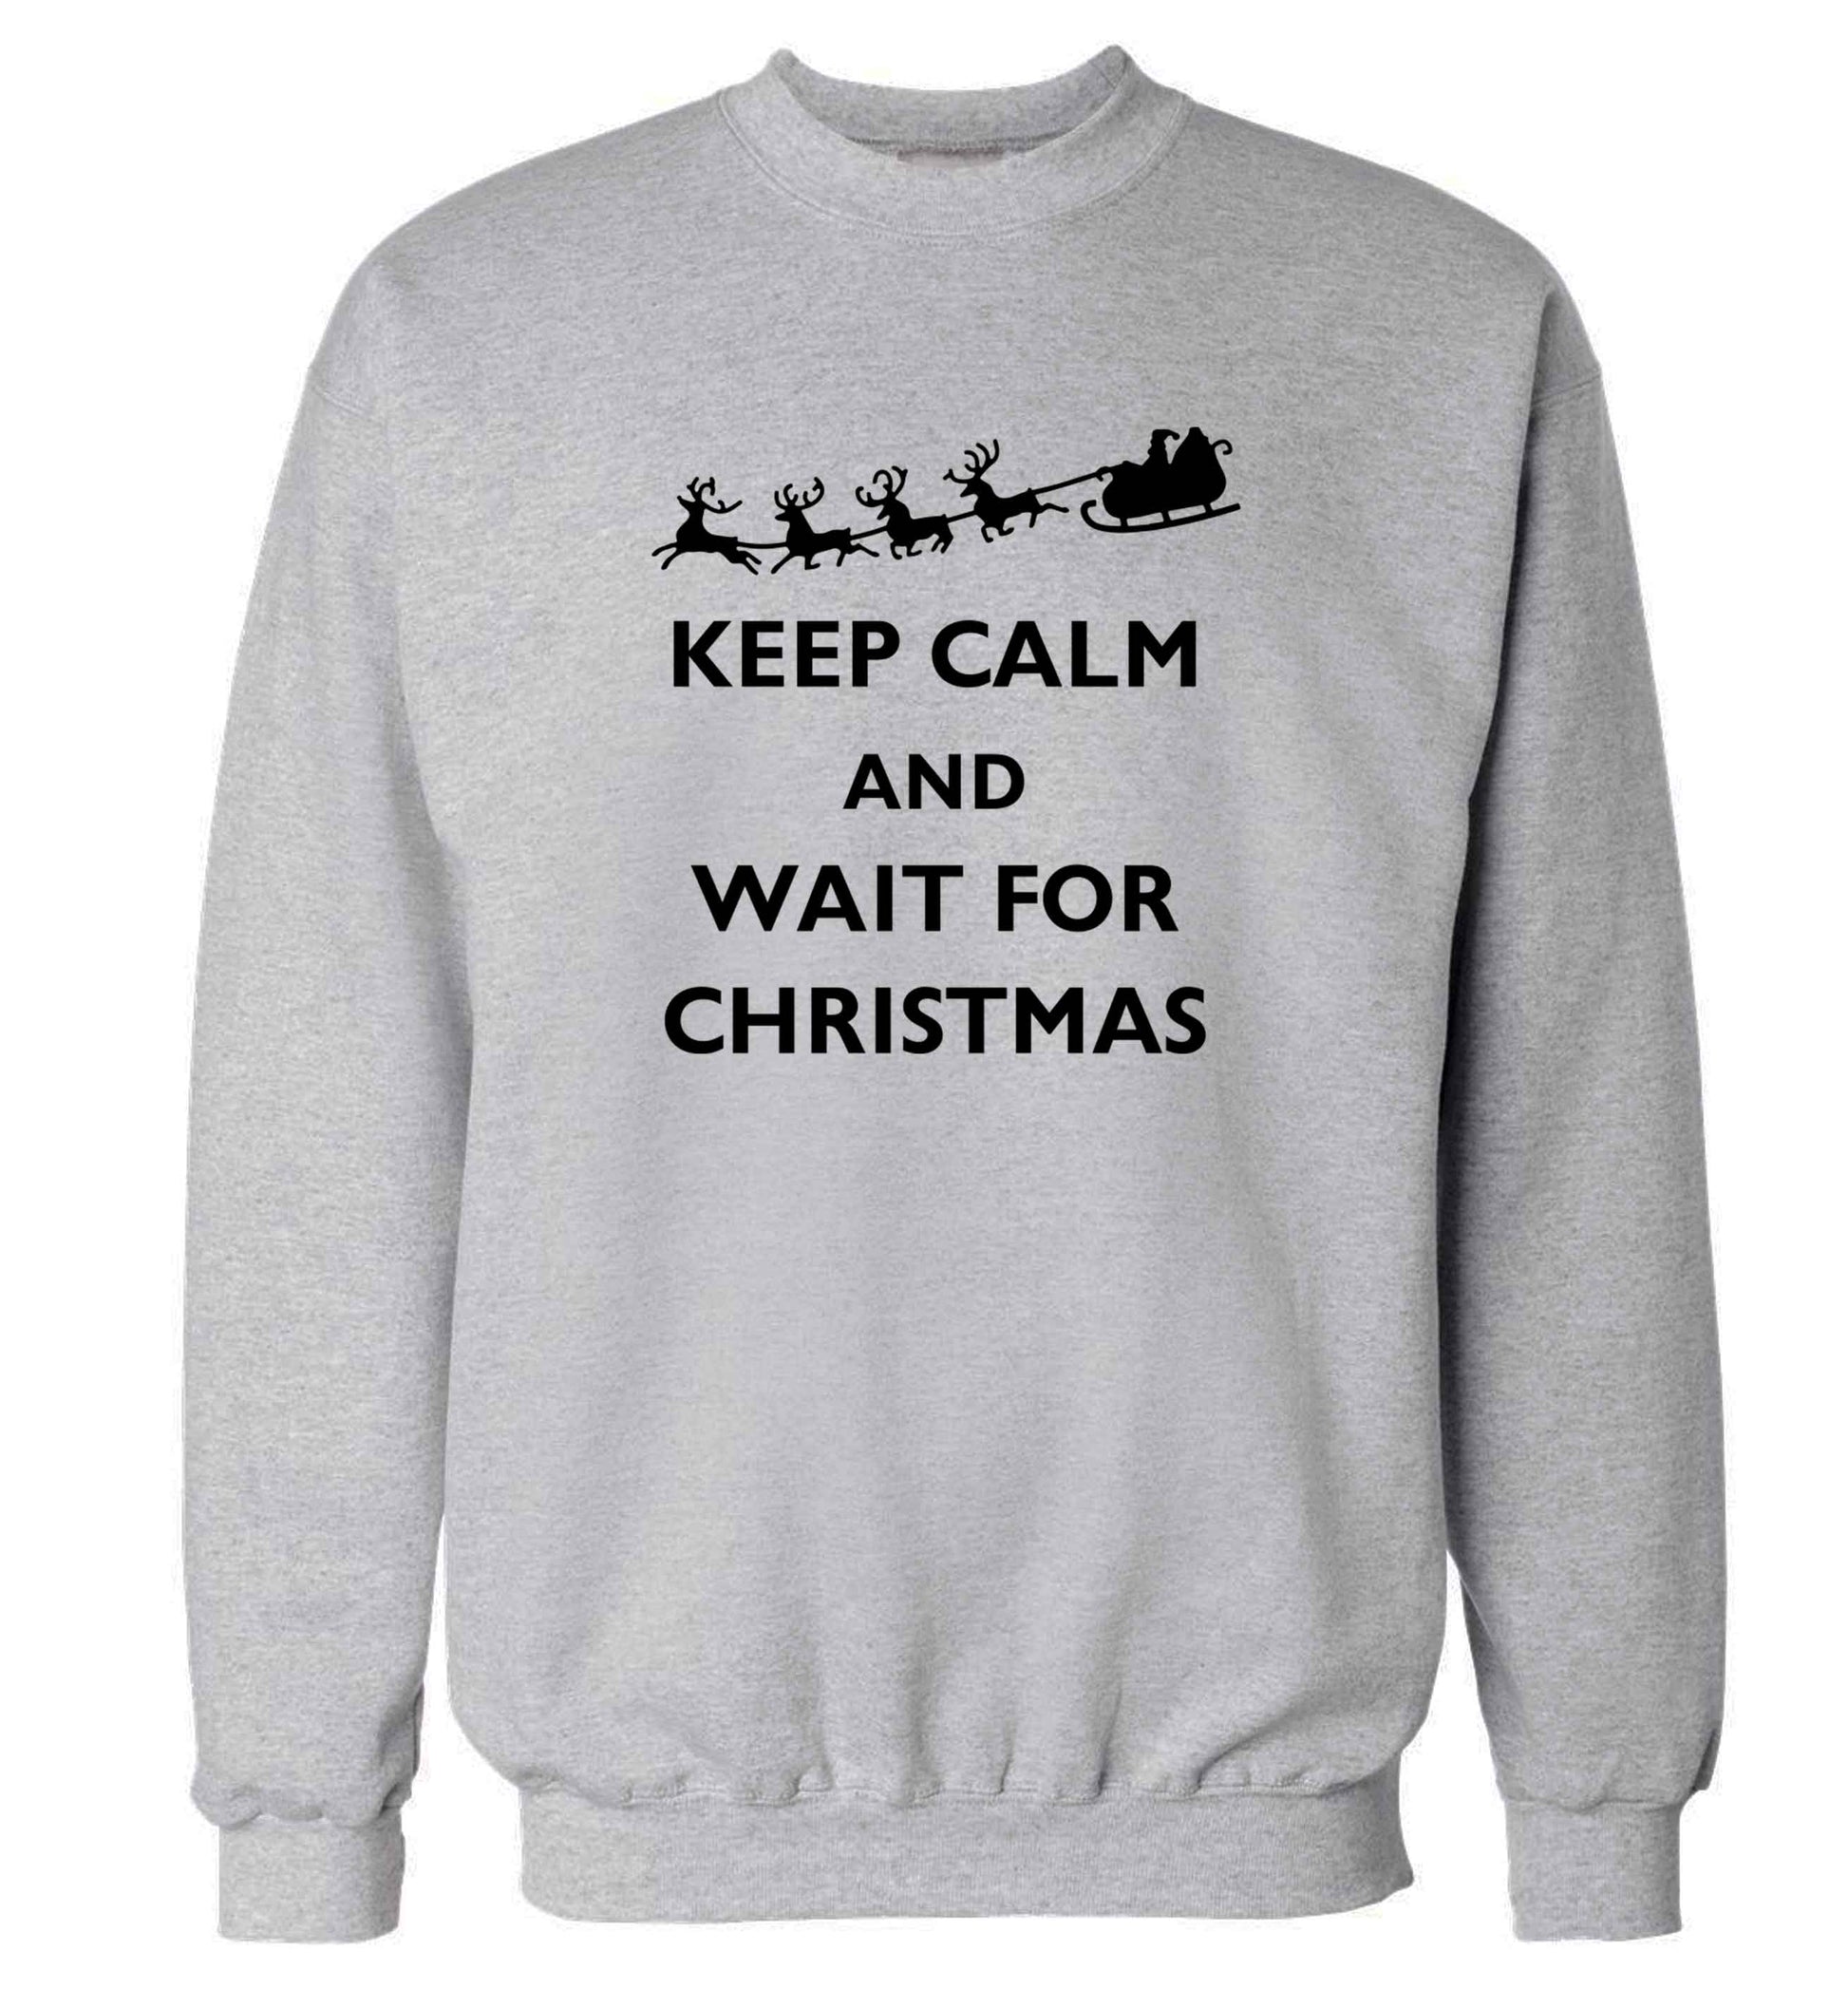 Keep calm and wait for Christmas adult's unisex grey sweater 2XL